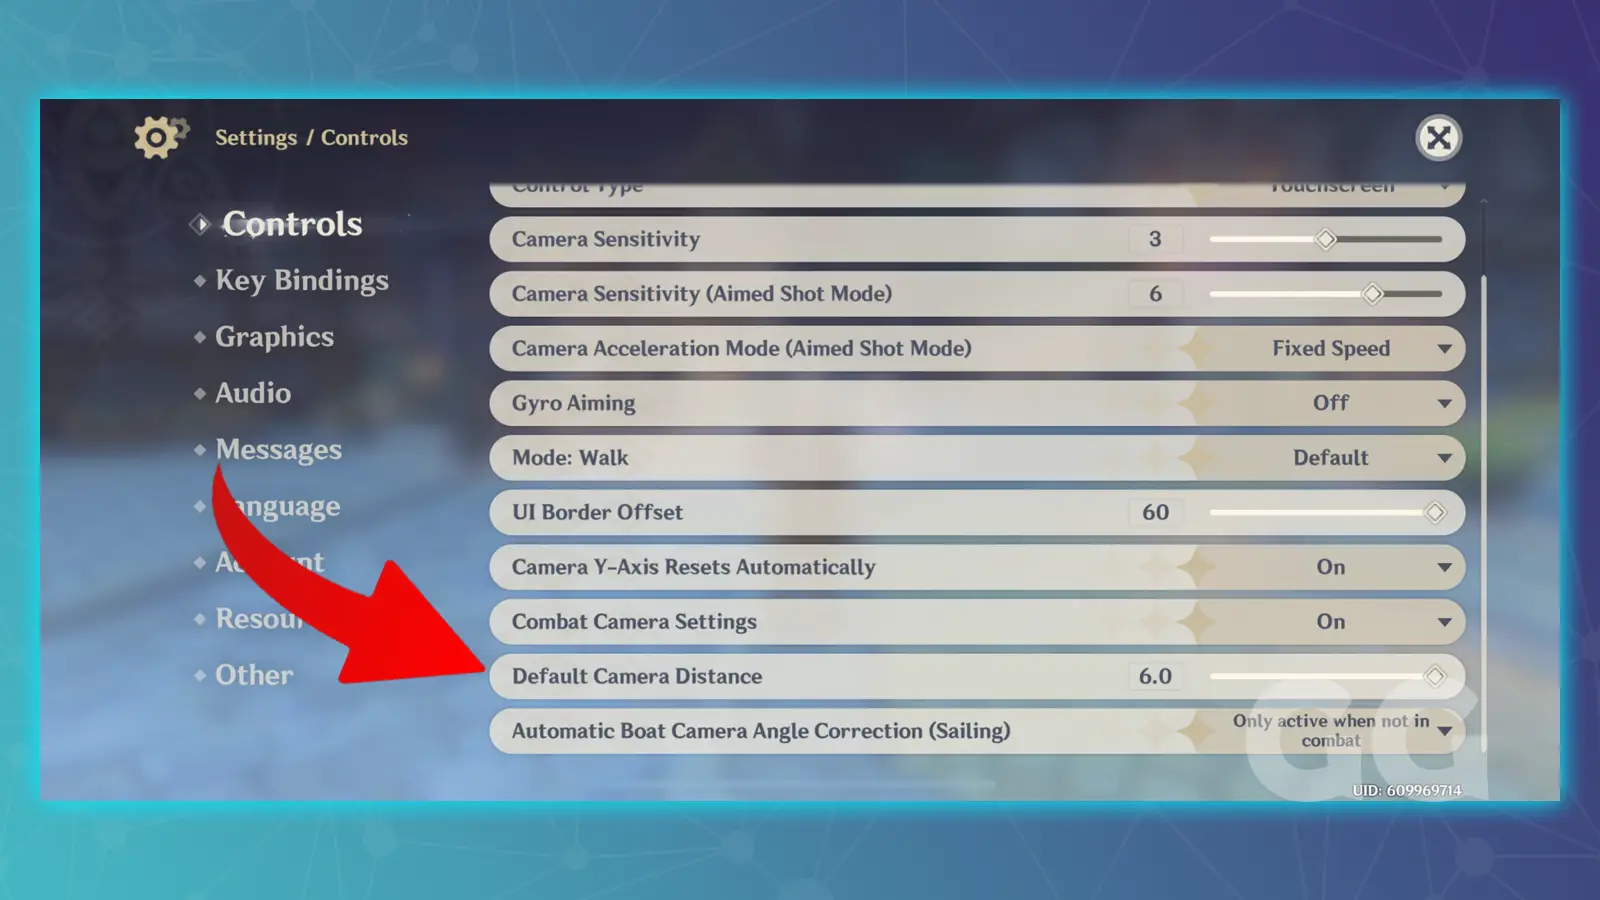 controls menu in genshin impact showing arrow pointing to default camera distance